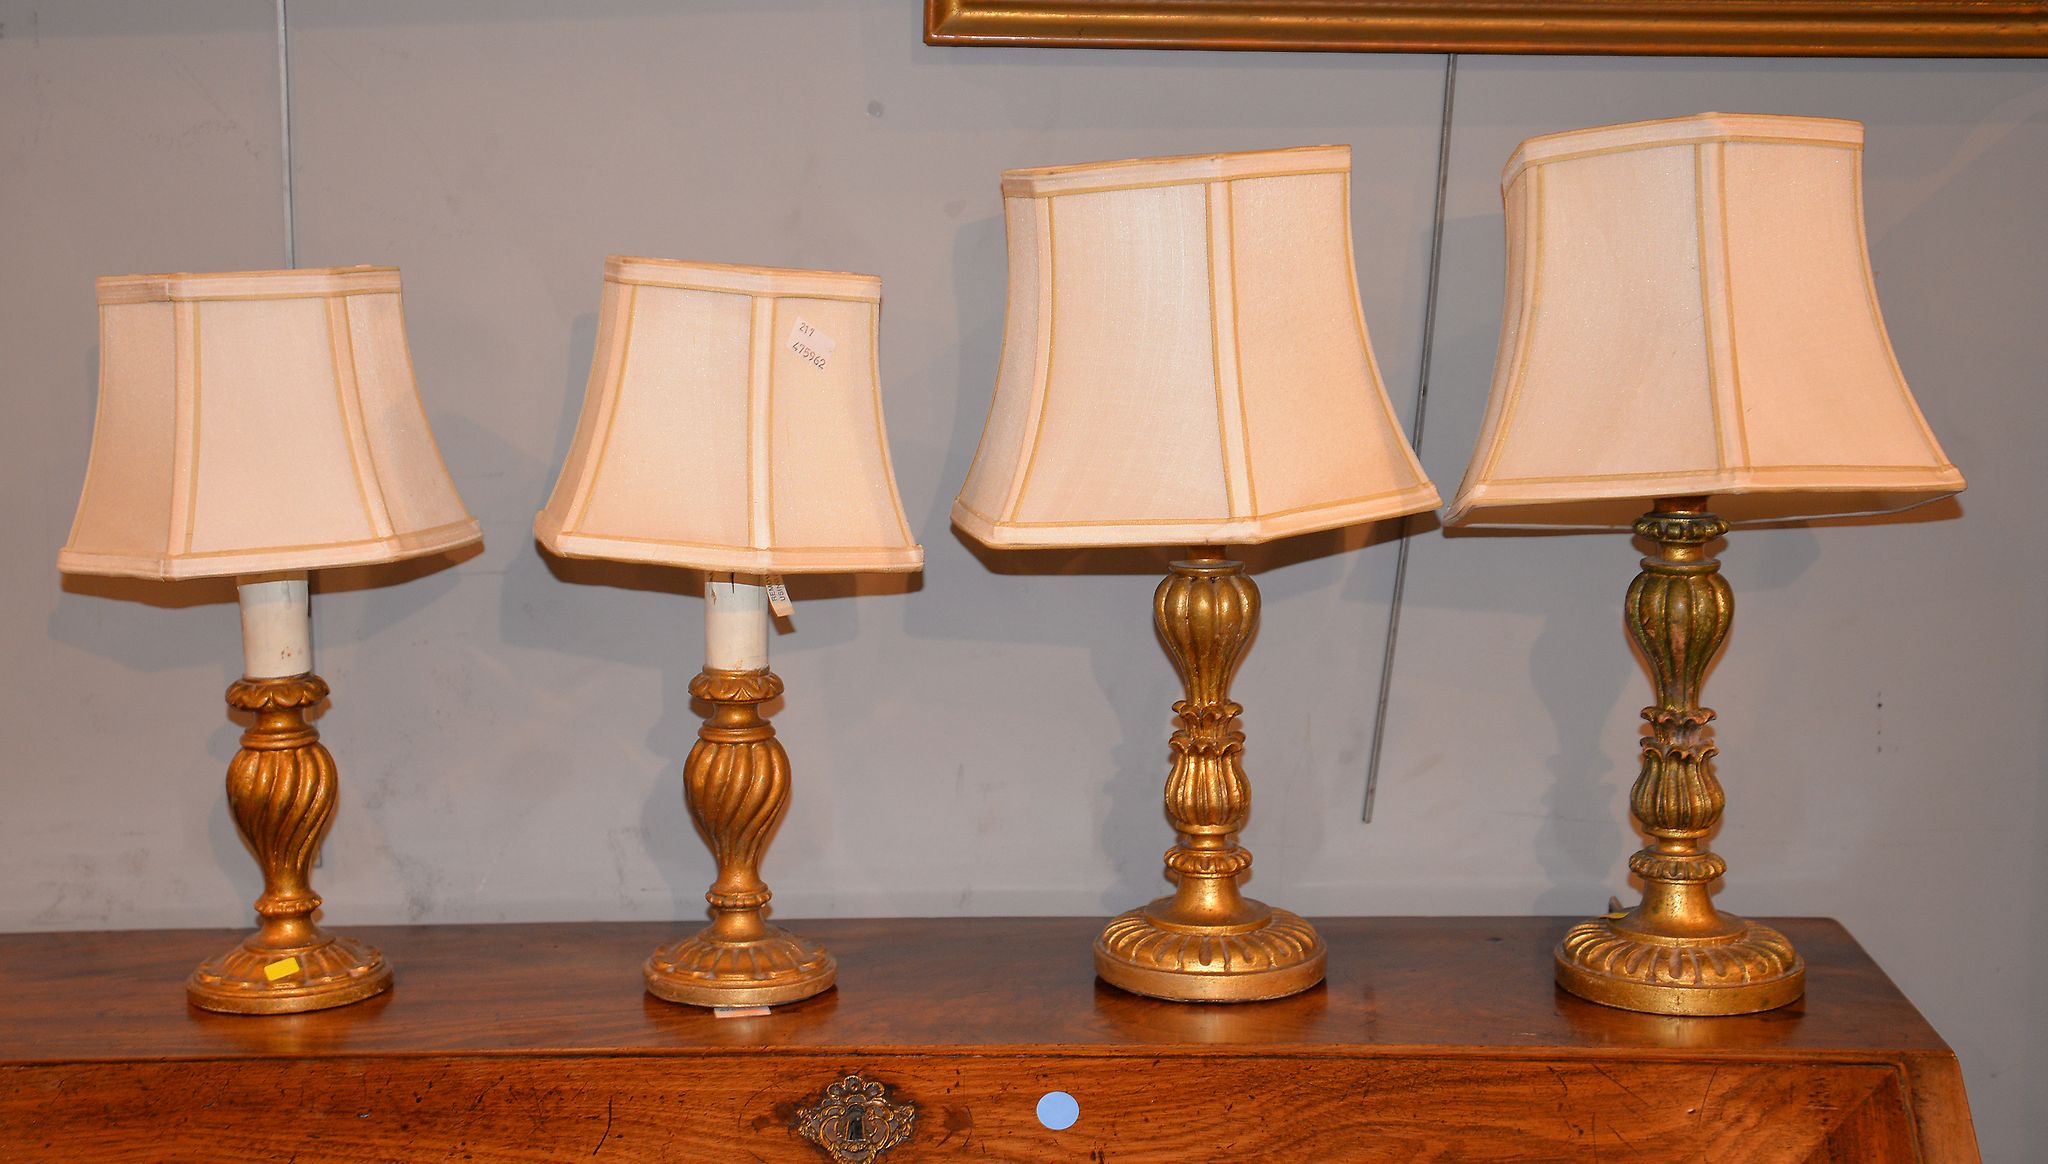 A pair of giltwood baluster lamp bases, 30cm high, and a further pair of similar smaller lamp bases